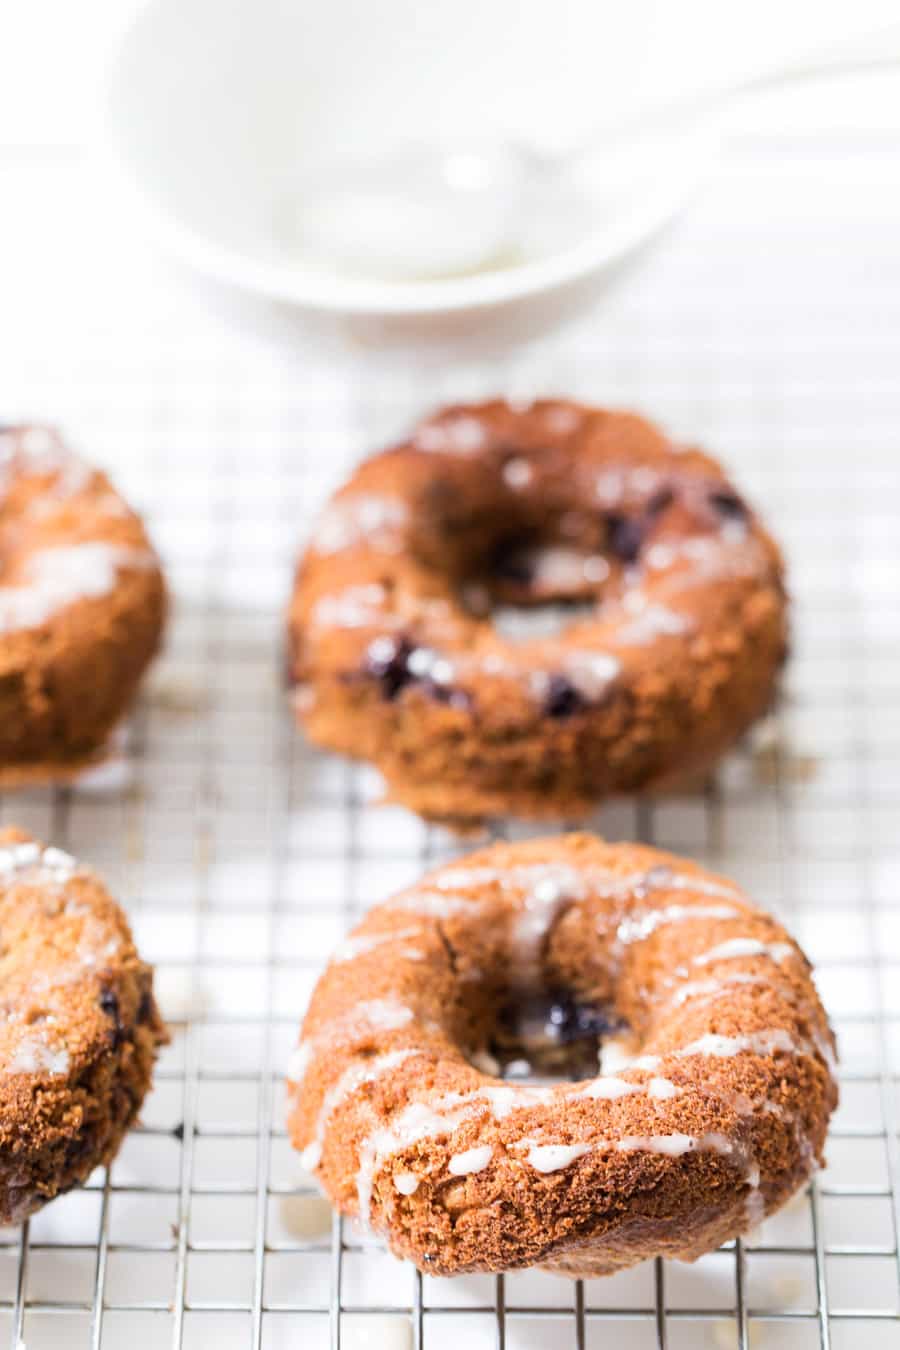 These VEGAN Blueberry Baked Donuts are soft, tender and light and are made 100% in the BLENDER! [vegan + gf]